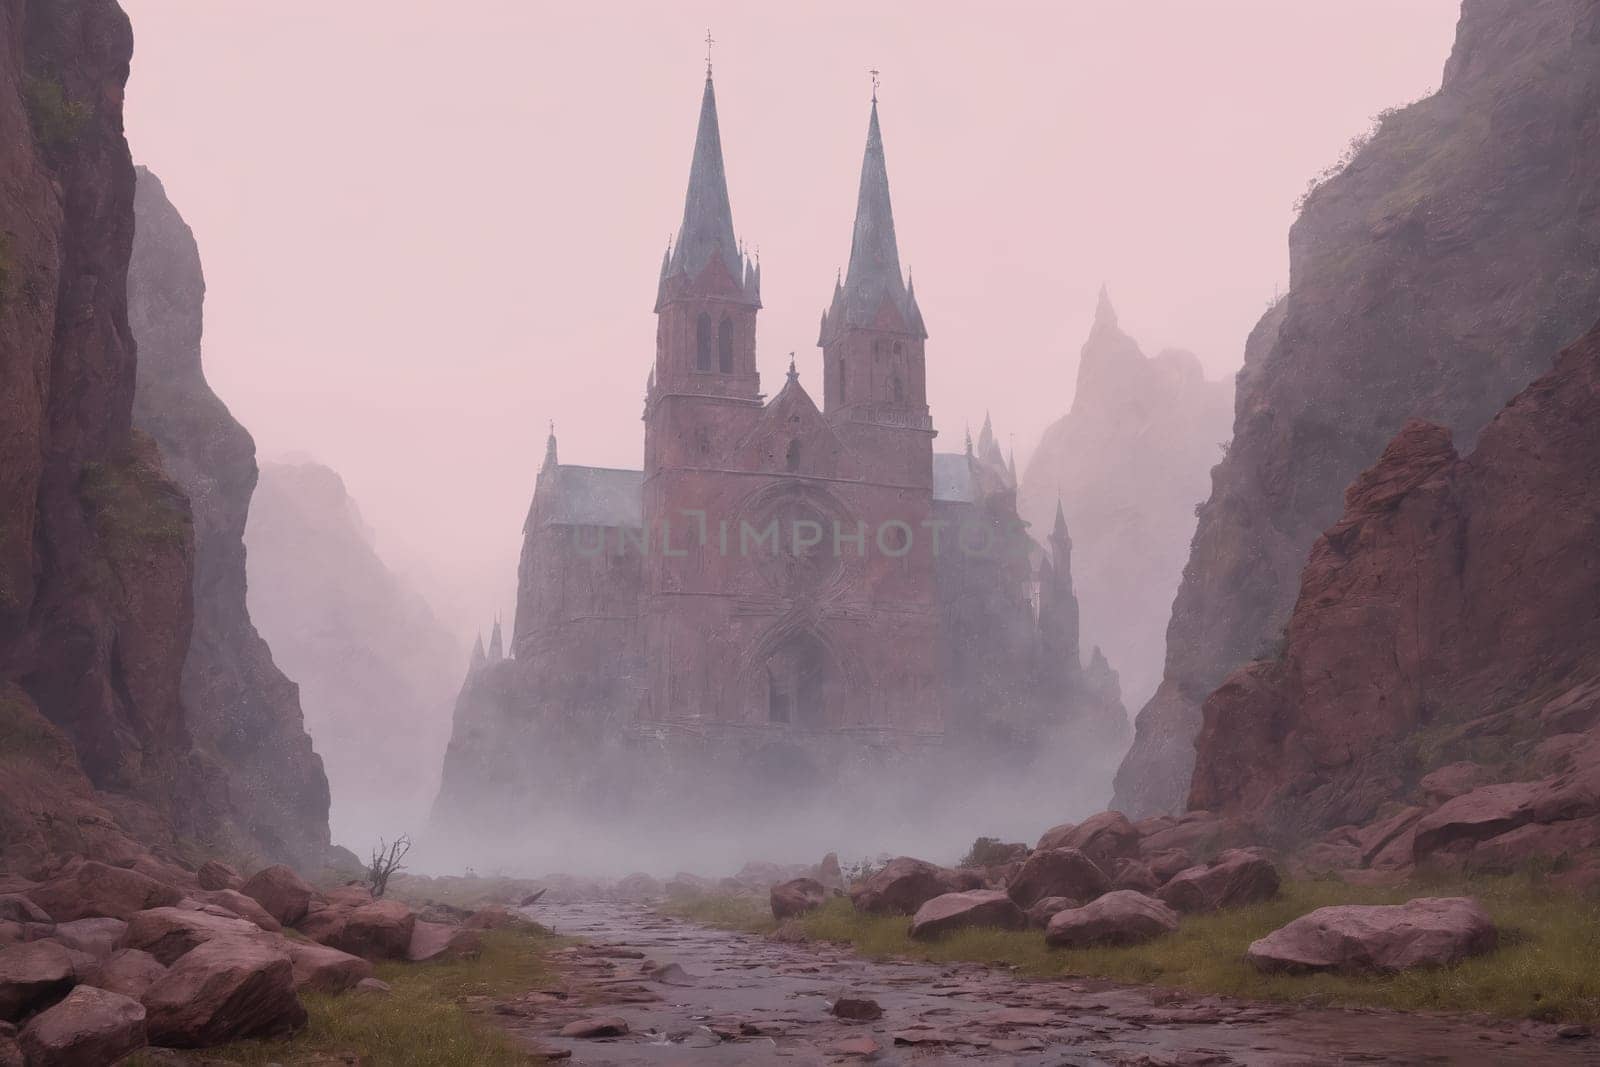 The image captures a serene moment of a church or cathedral standing tall among mist-covered mountains, illuminated in a gentle pink glow.